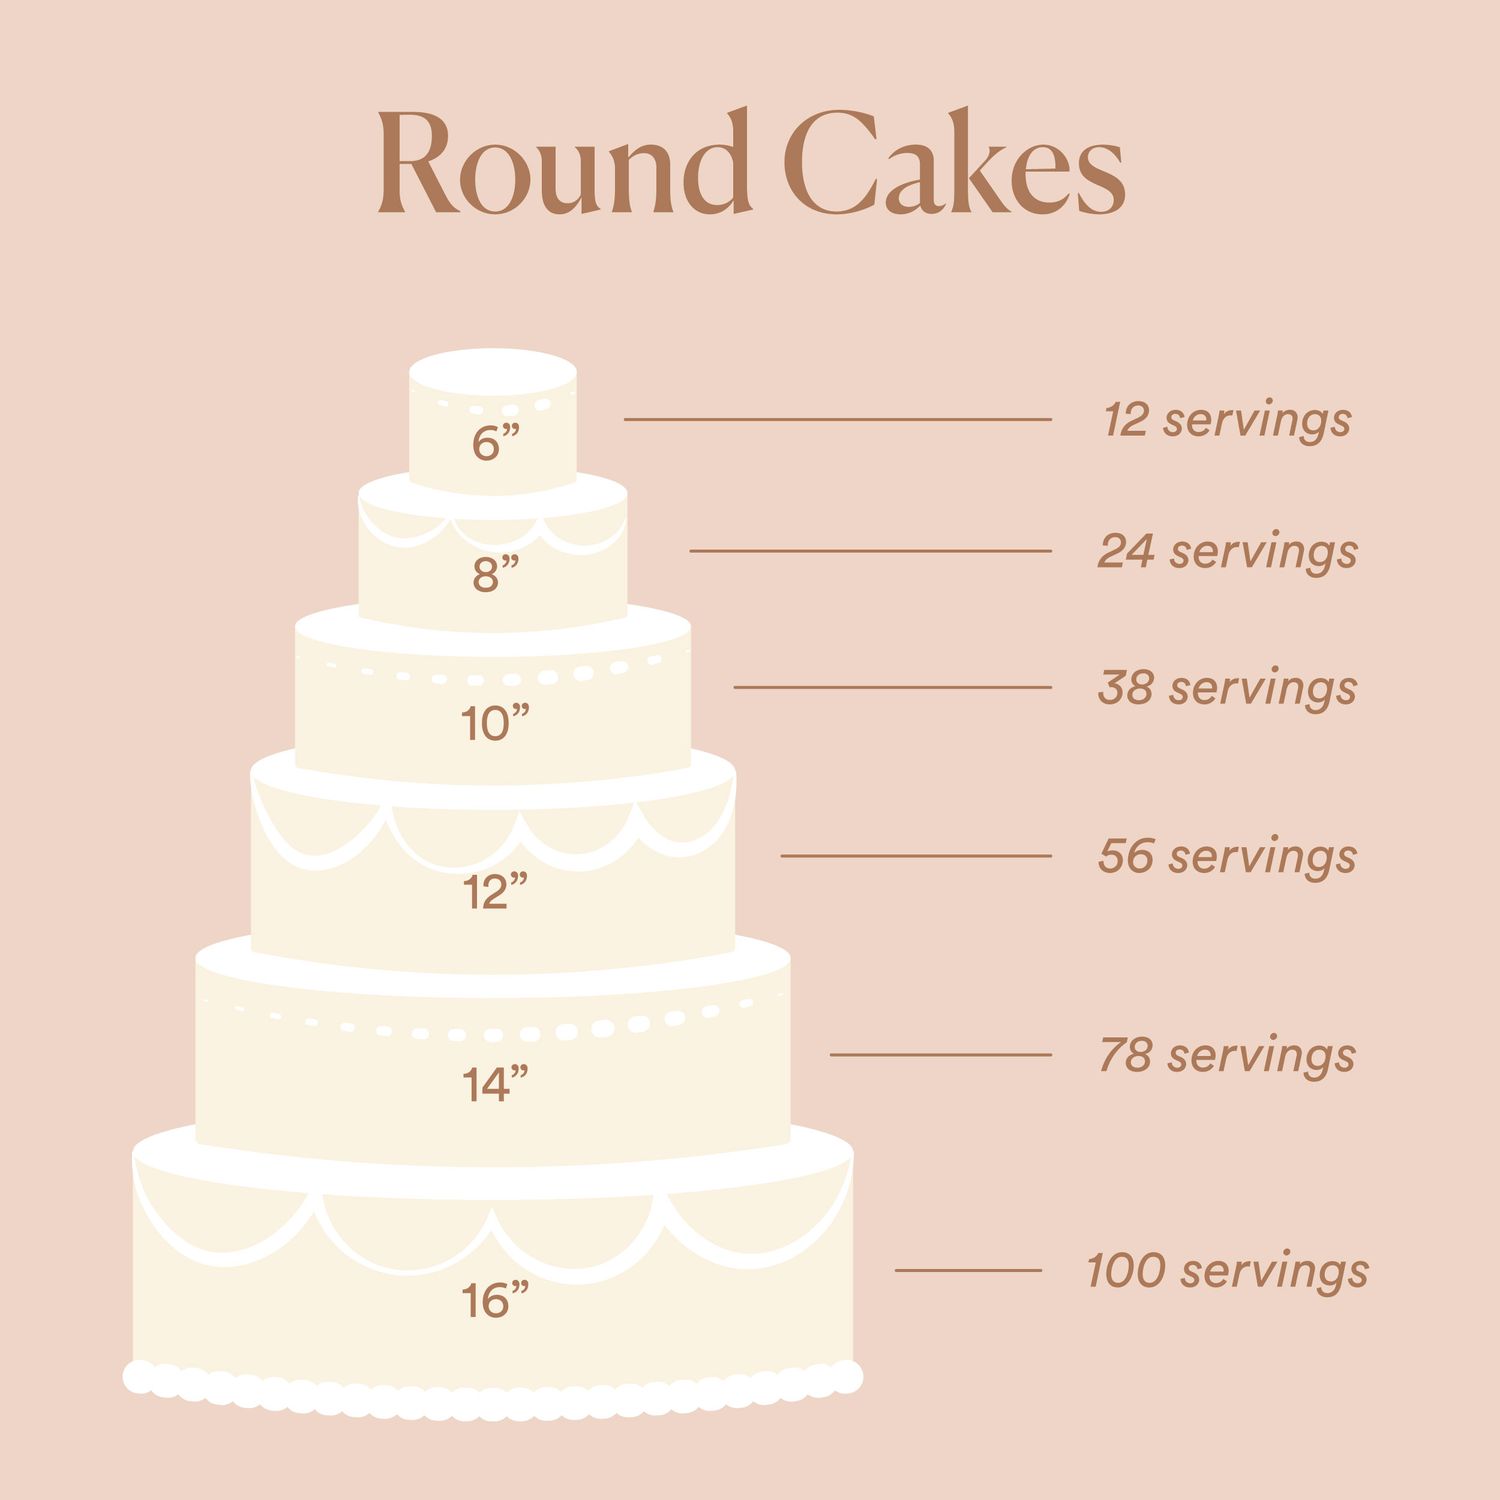 6 Inch Cake Servings: Determining Portions for a 6-Inch Cake